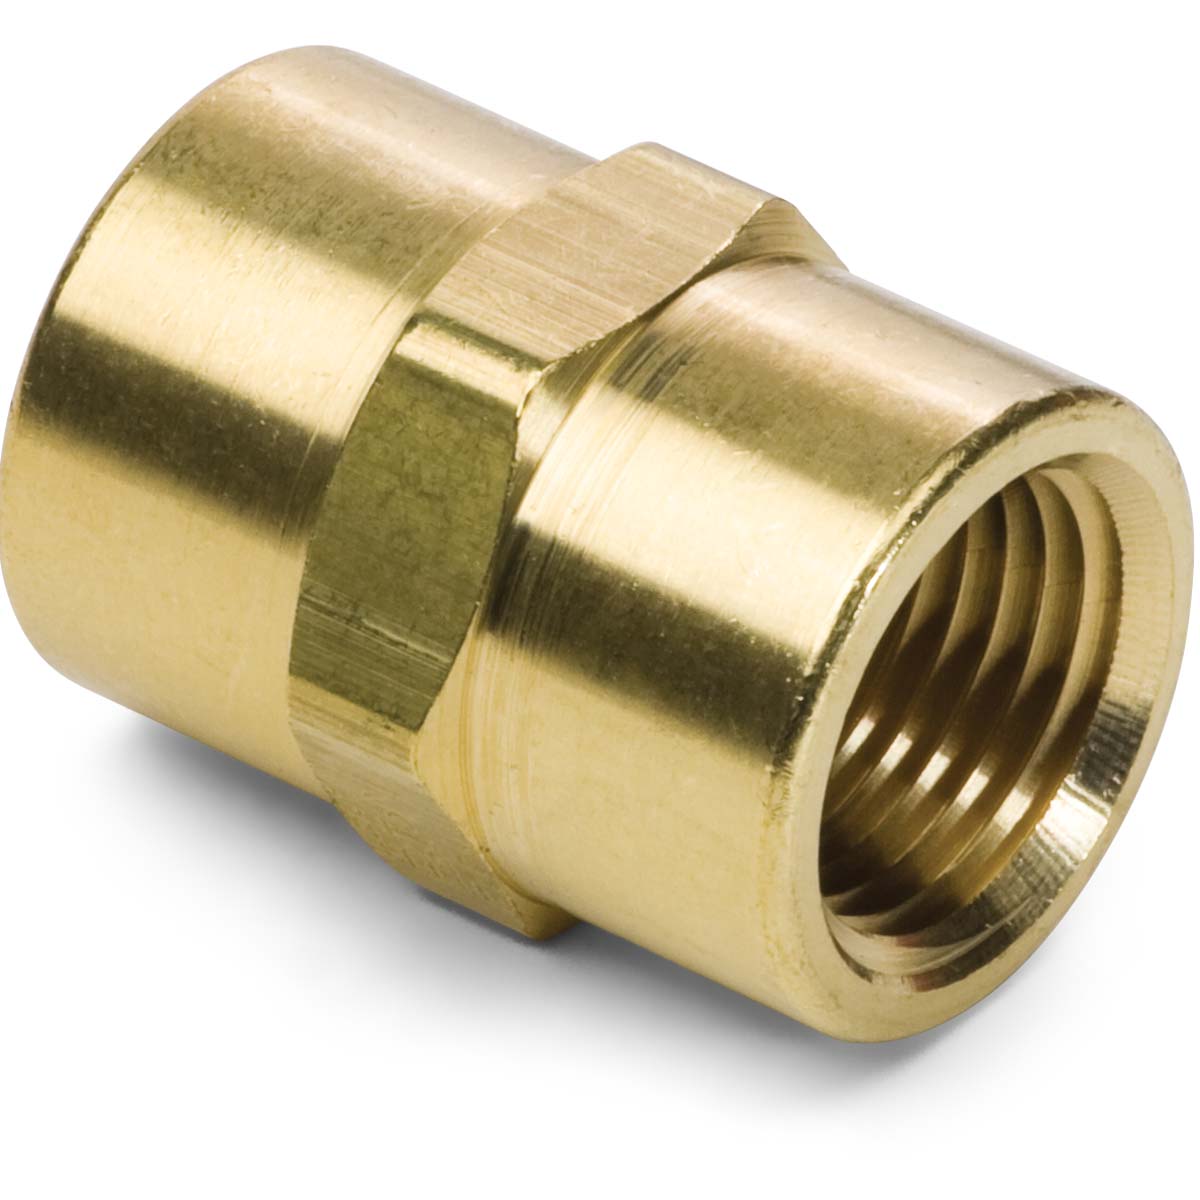 Brass Fittings and Compression